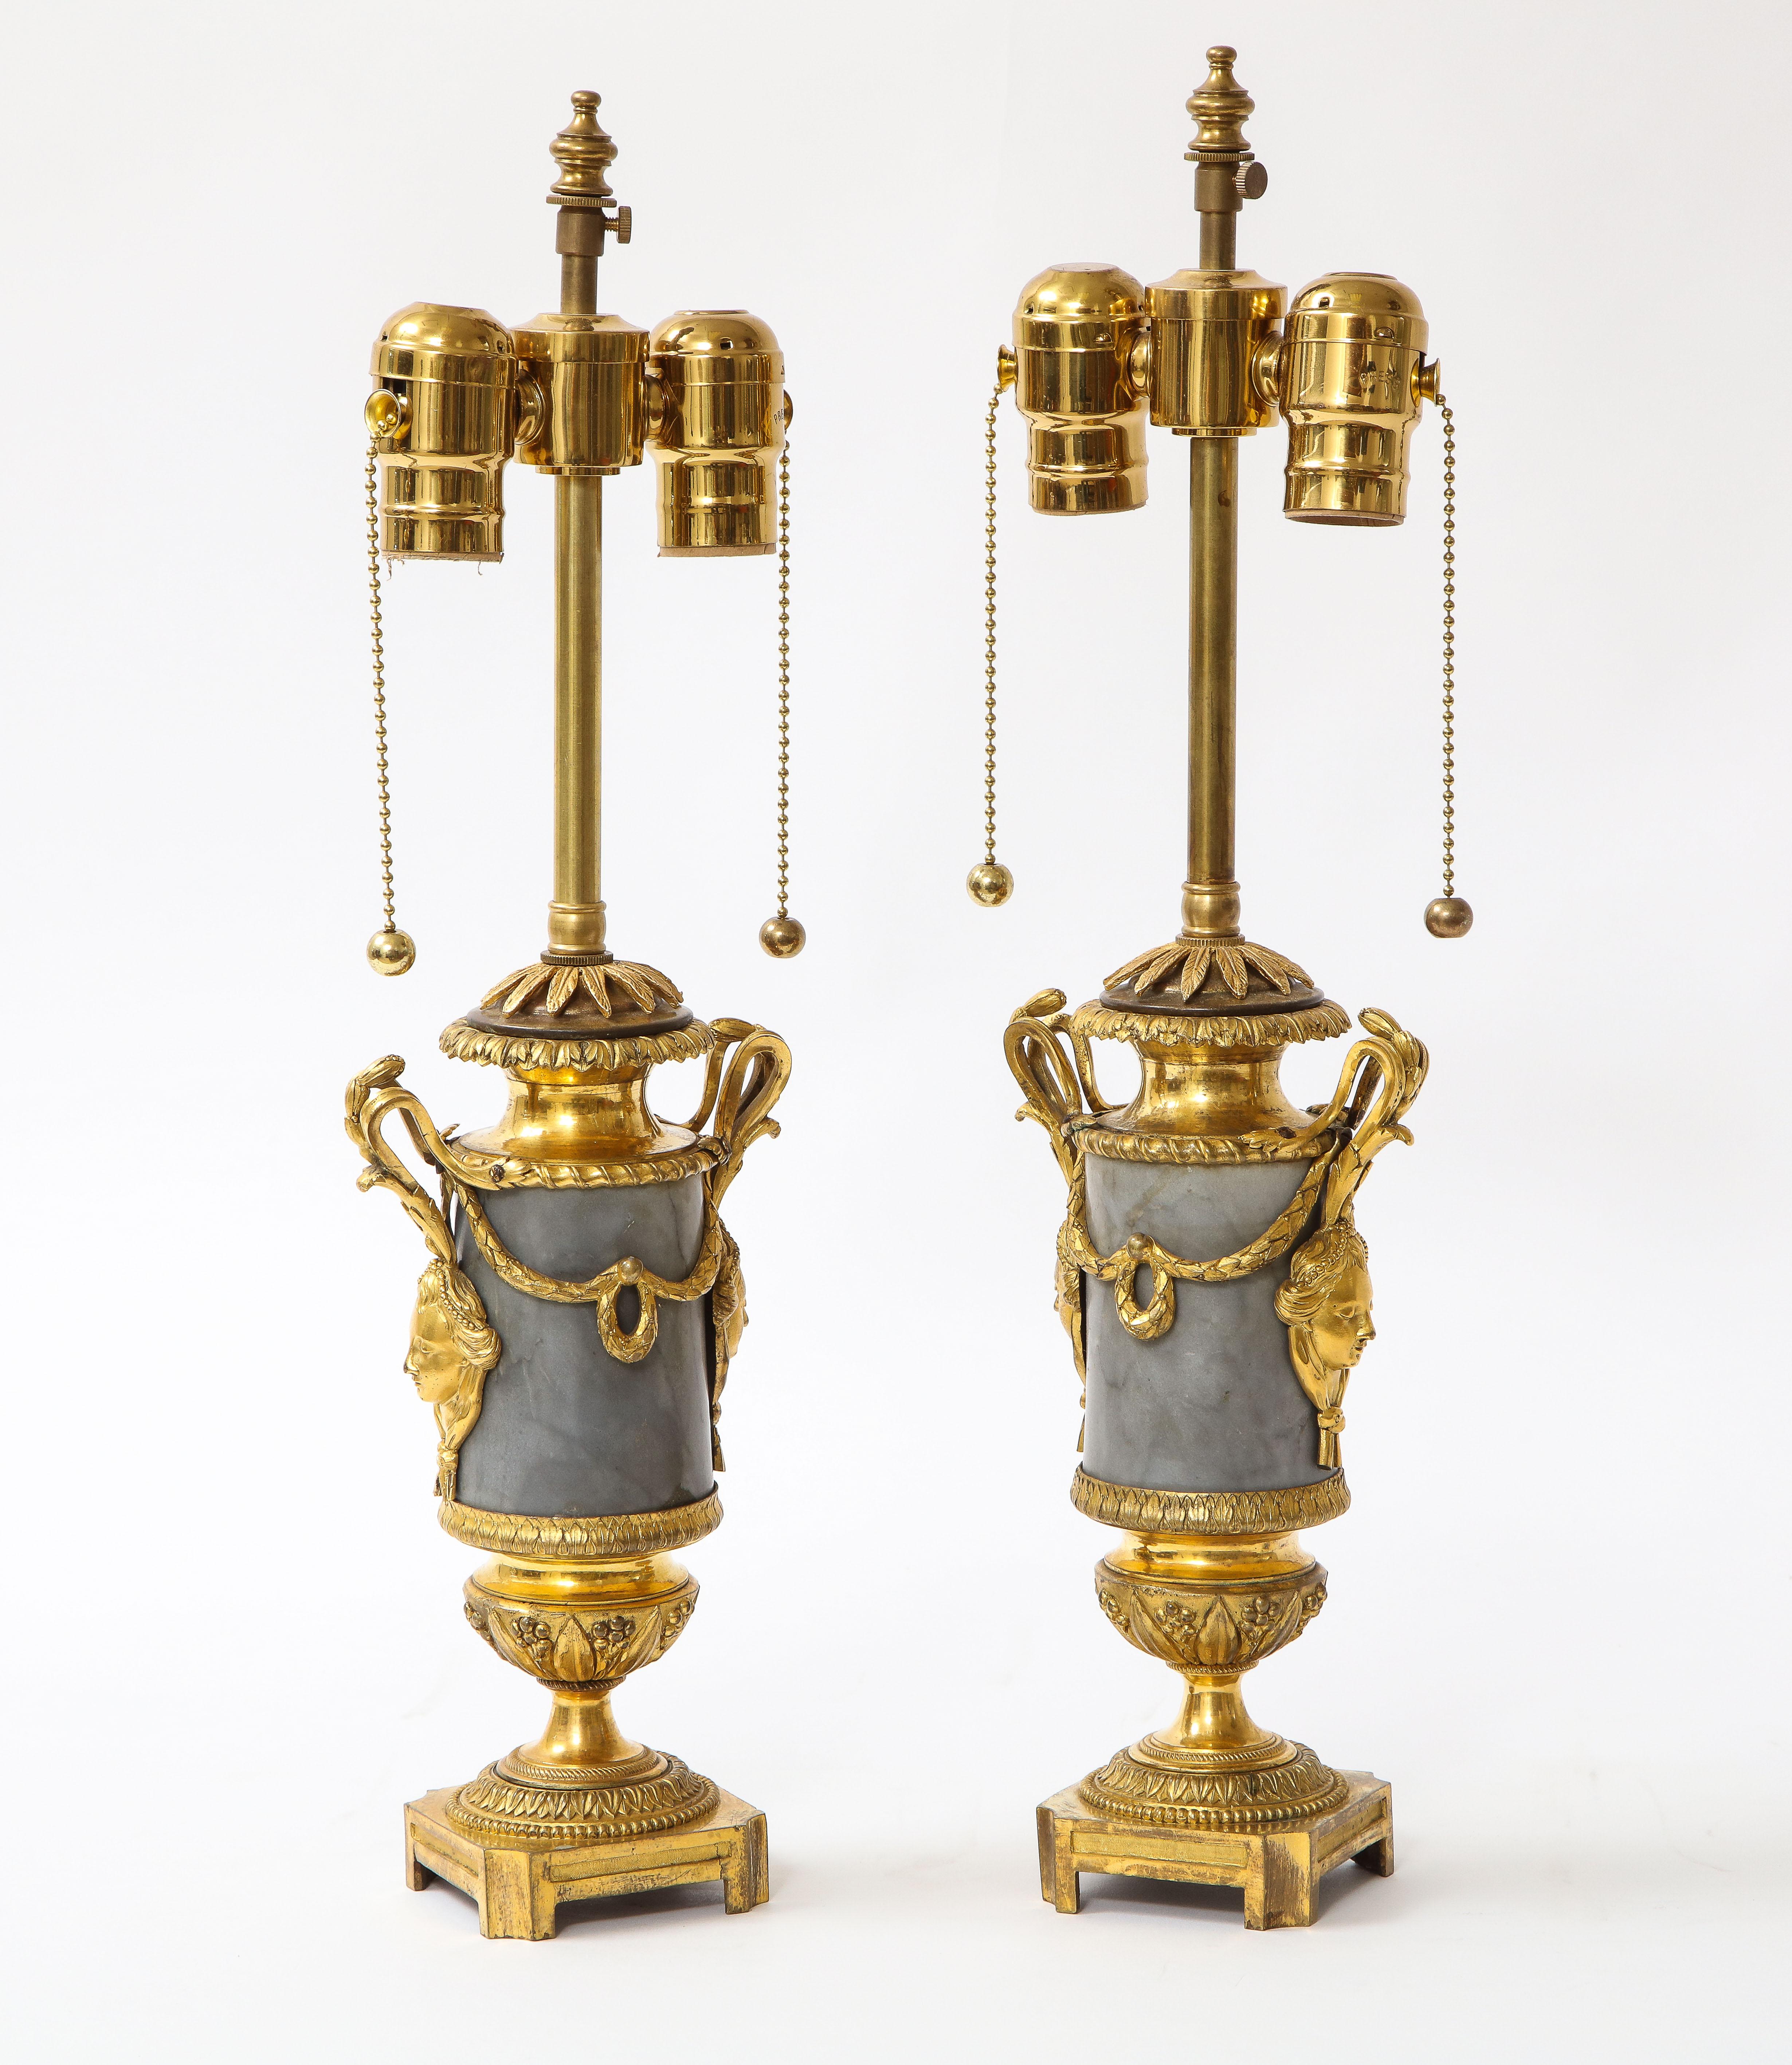 A fine pair of Louis XVI Period Dore bronze mounted grey and black veined marble vases turned to lamps. Each is beautifully made with a cylindrical hand-carved grey and black veined marble body with exceptional dore bronze mounts which are each